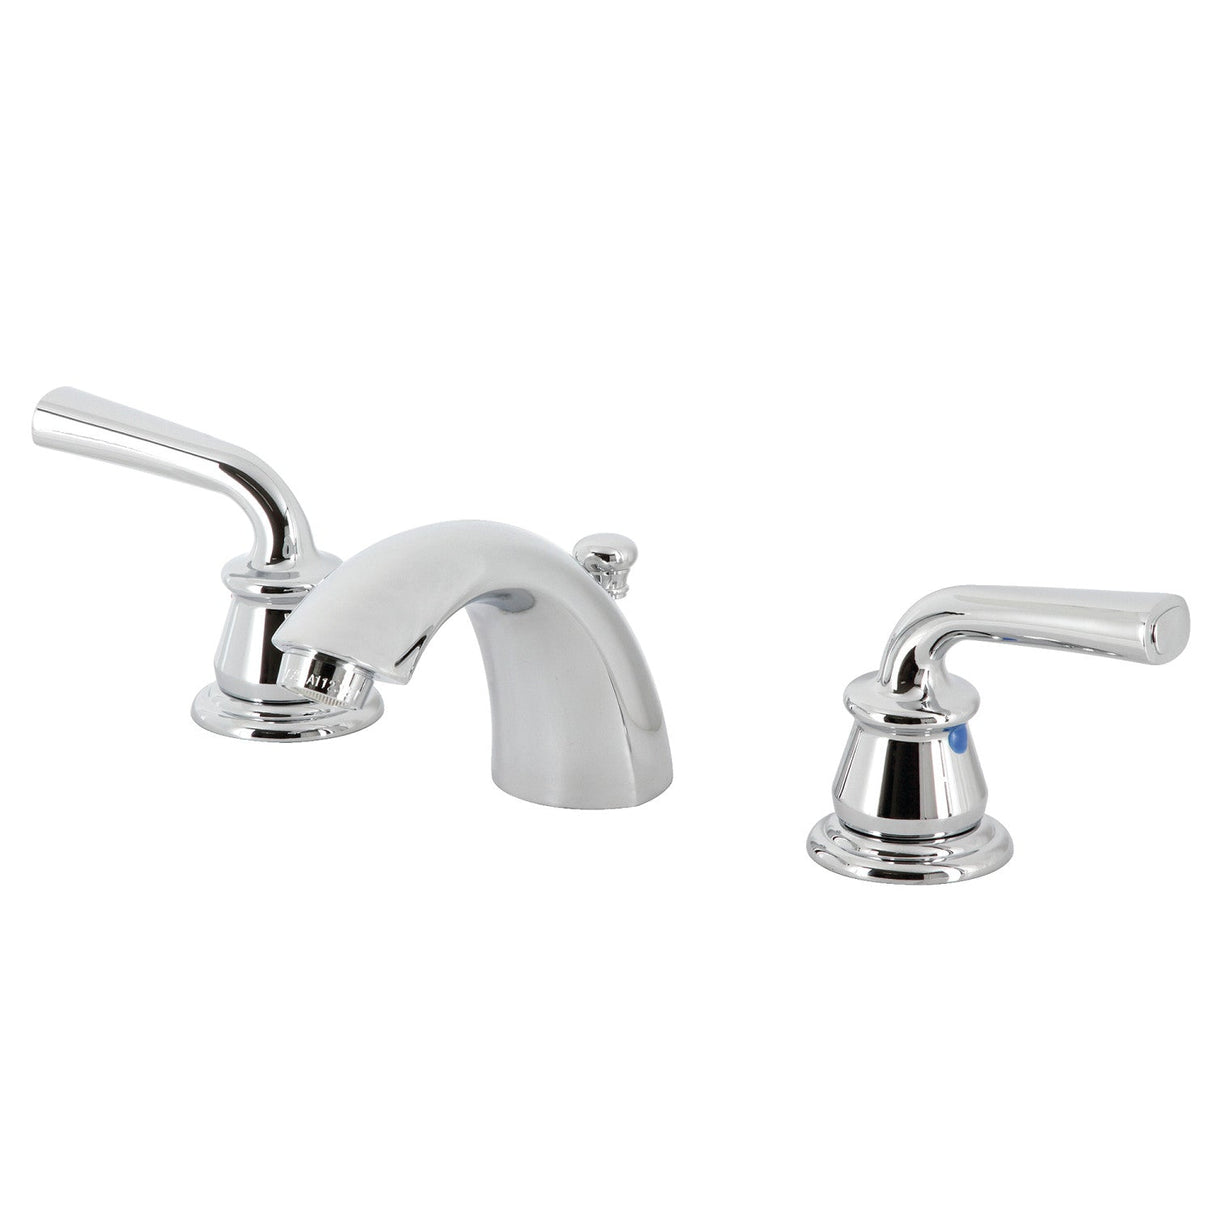 Restoration KB951RXL Two-Handle 3-Hole Deck Mount Mini-Widespread Bathroom Faucet with Plastic Pop-Up, Polished Chrome